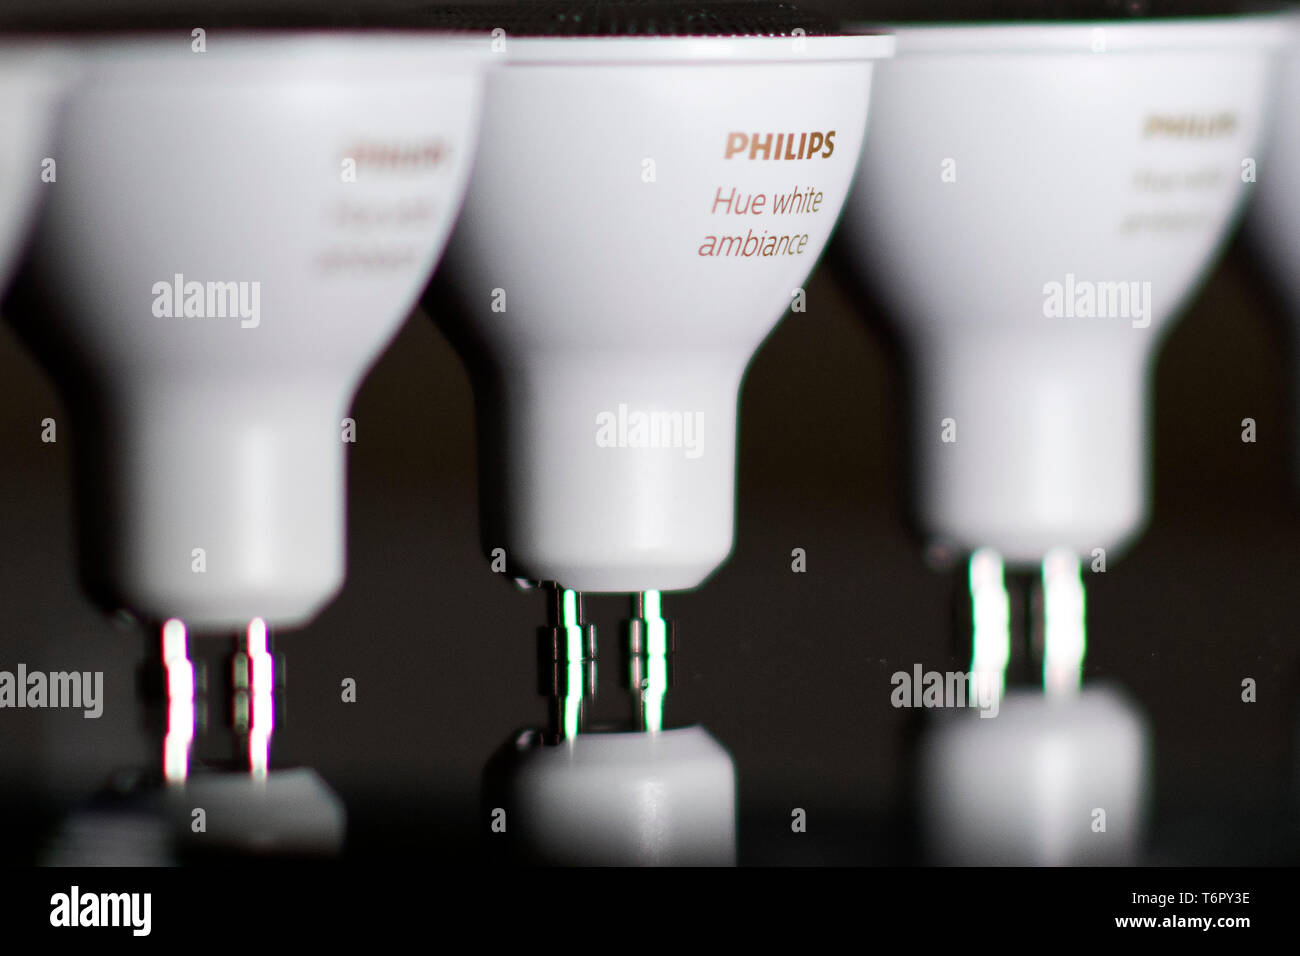 Philips Hue White Ambiance GU10 light bulbs pictured in London